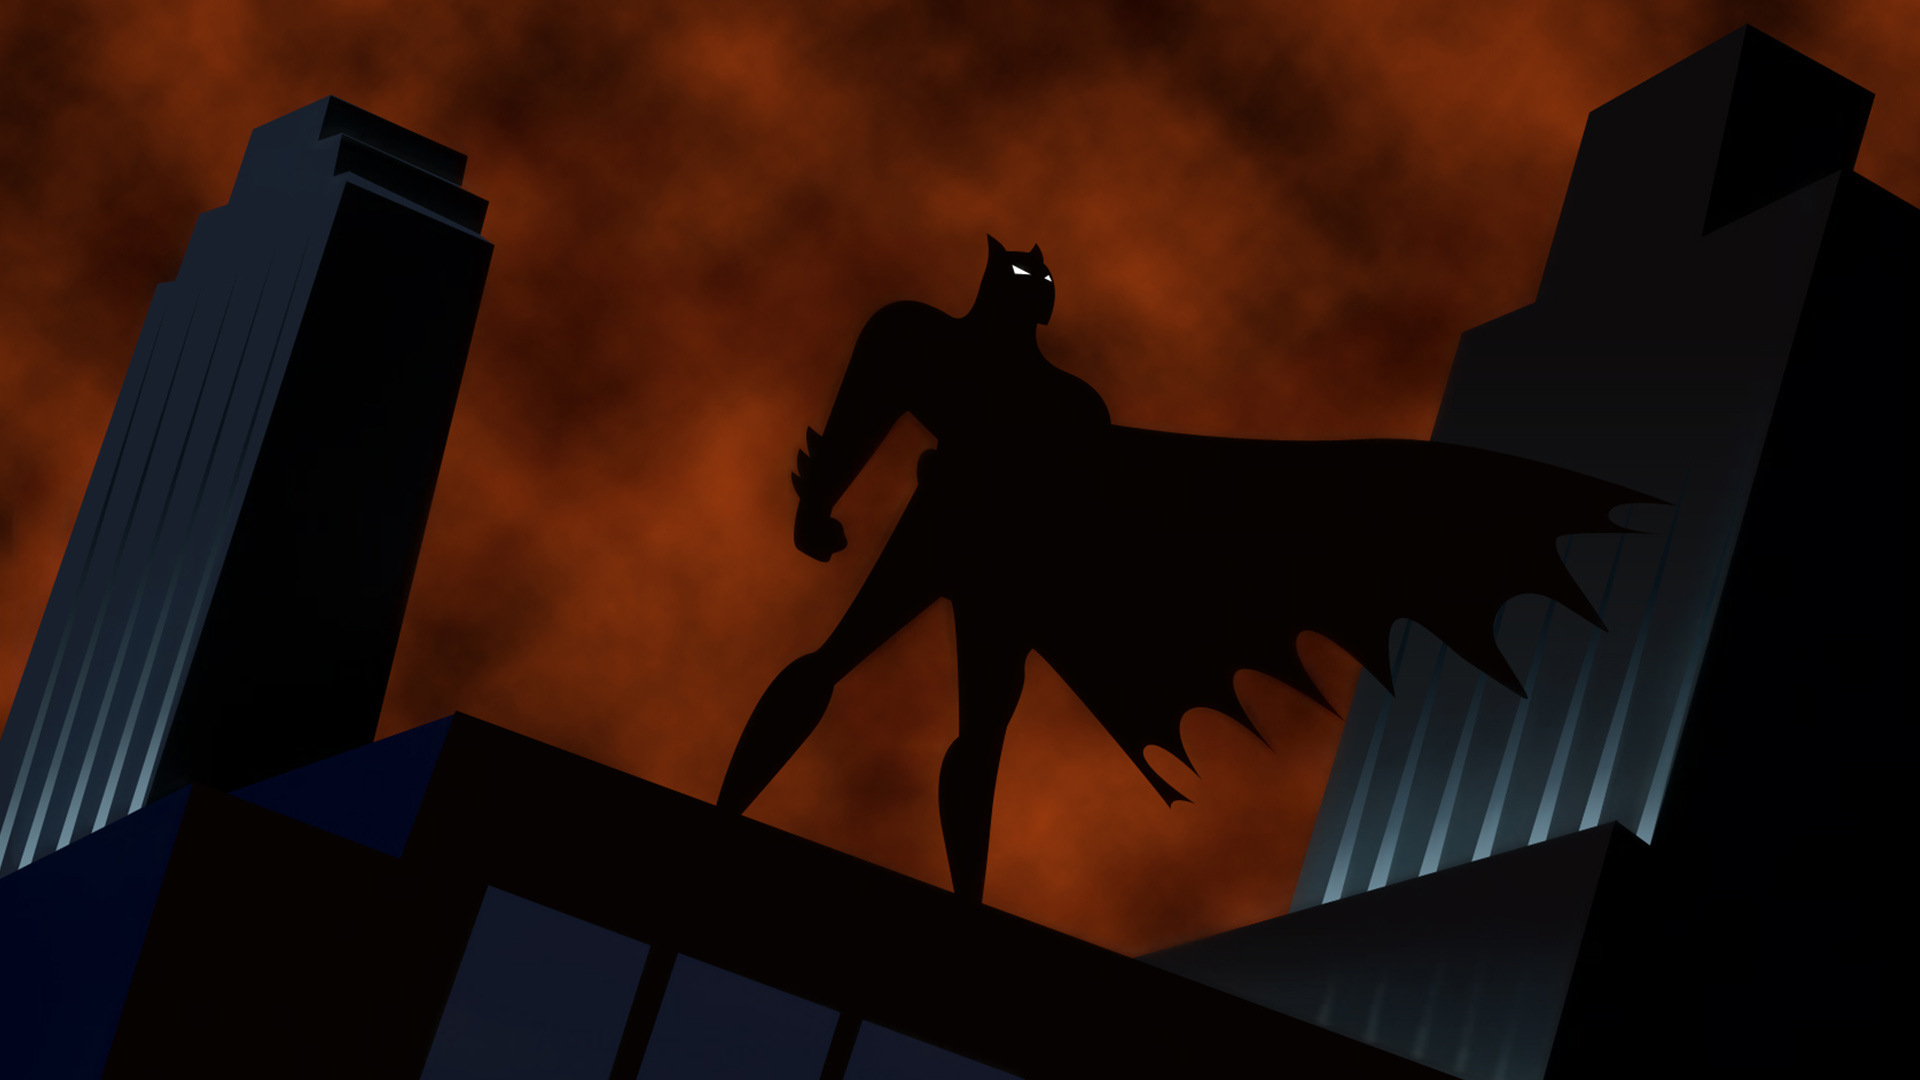 Batman: The Animated Series HD Wallpaper by Bruce Timm